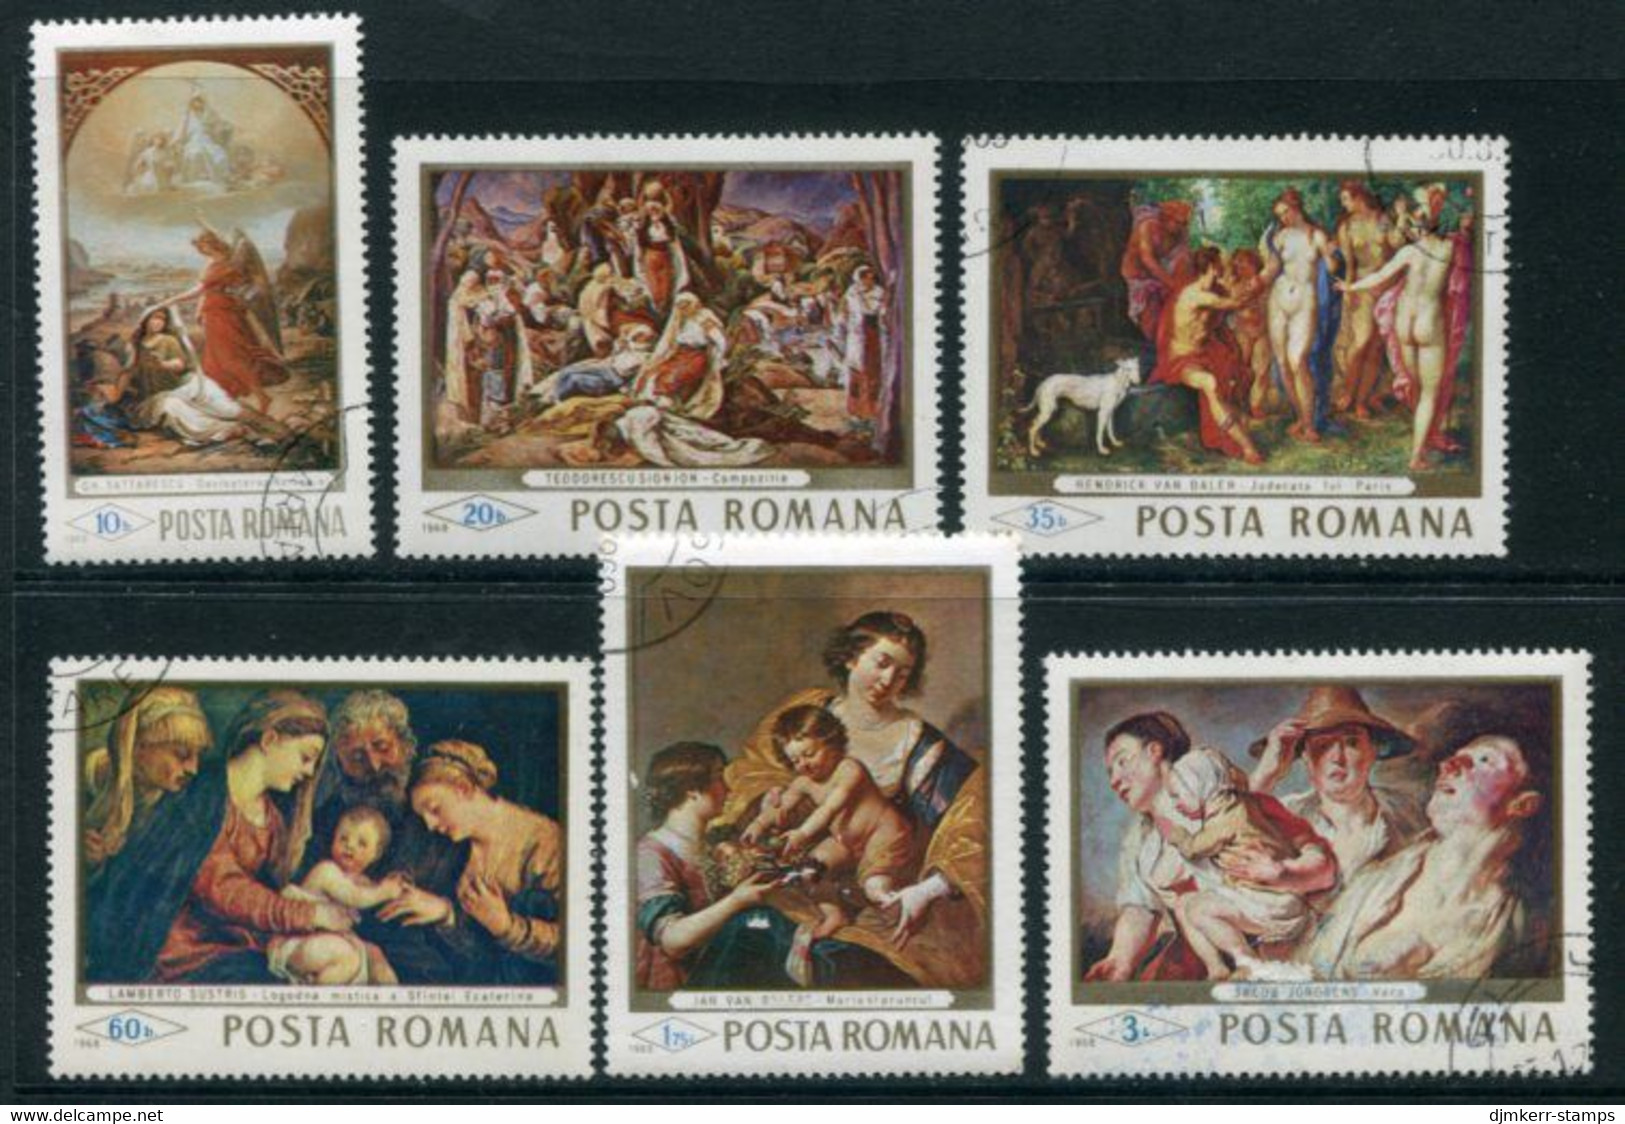 ROMANIA 1968 National Gallery Paintings  Used.   Michel 2706-11 - Used Stamps